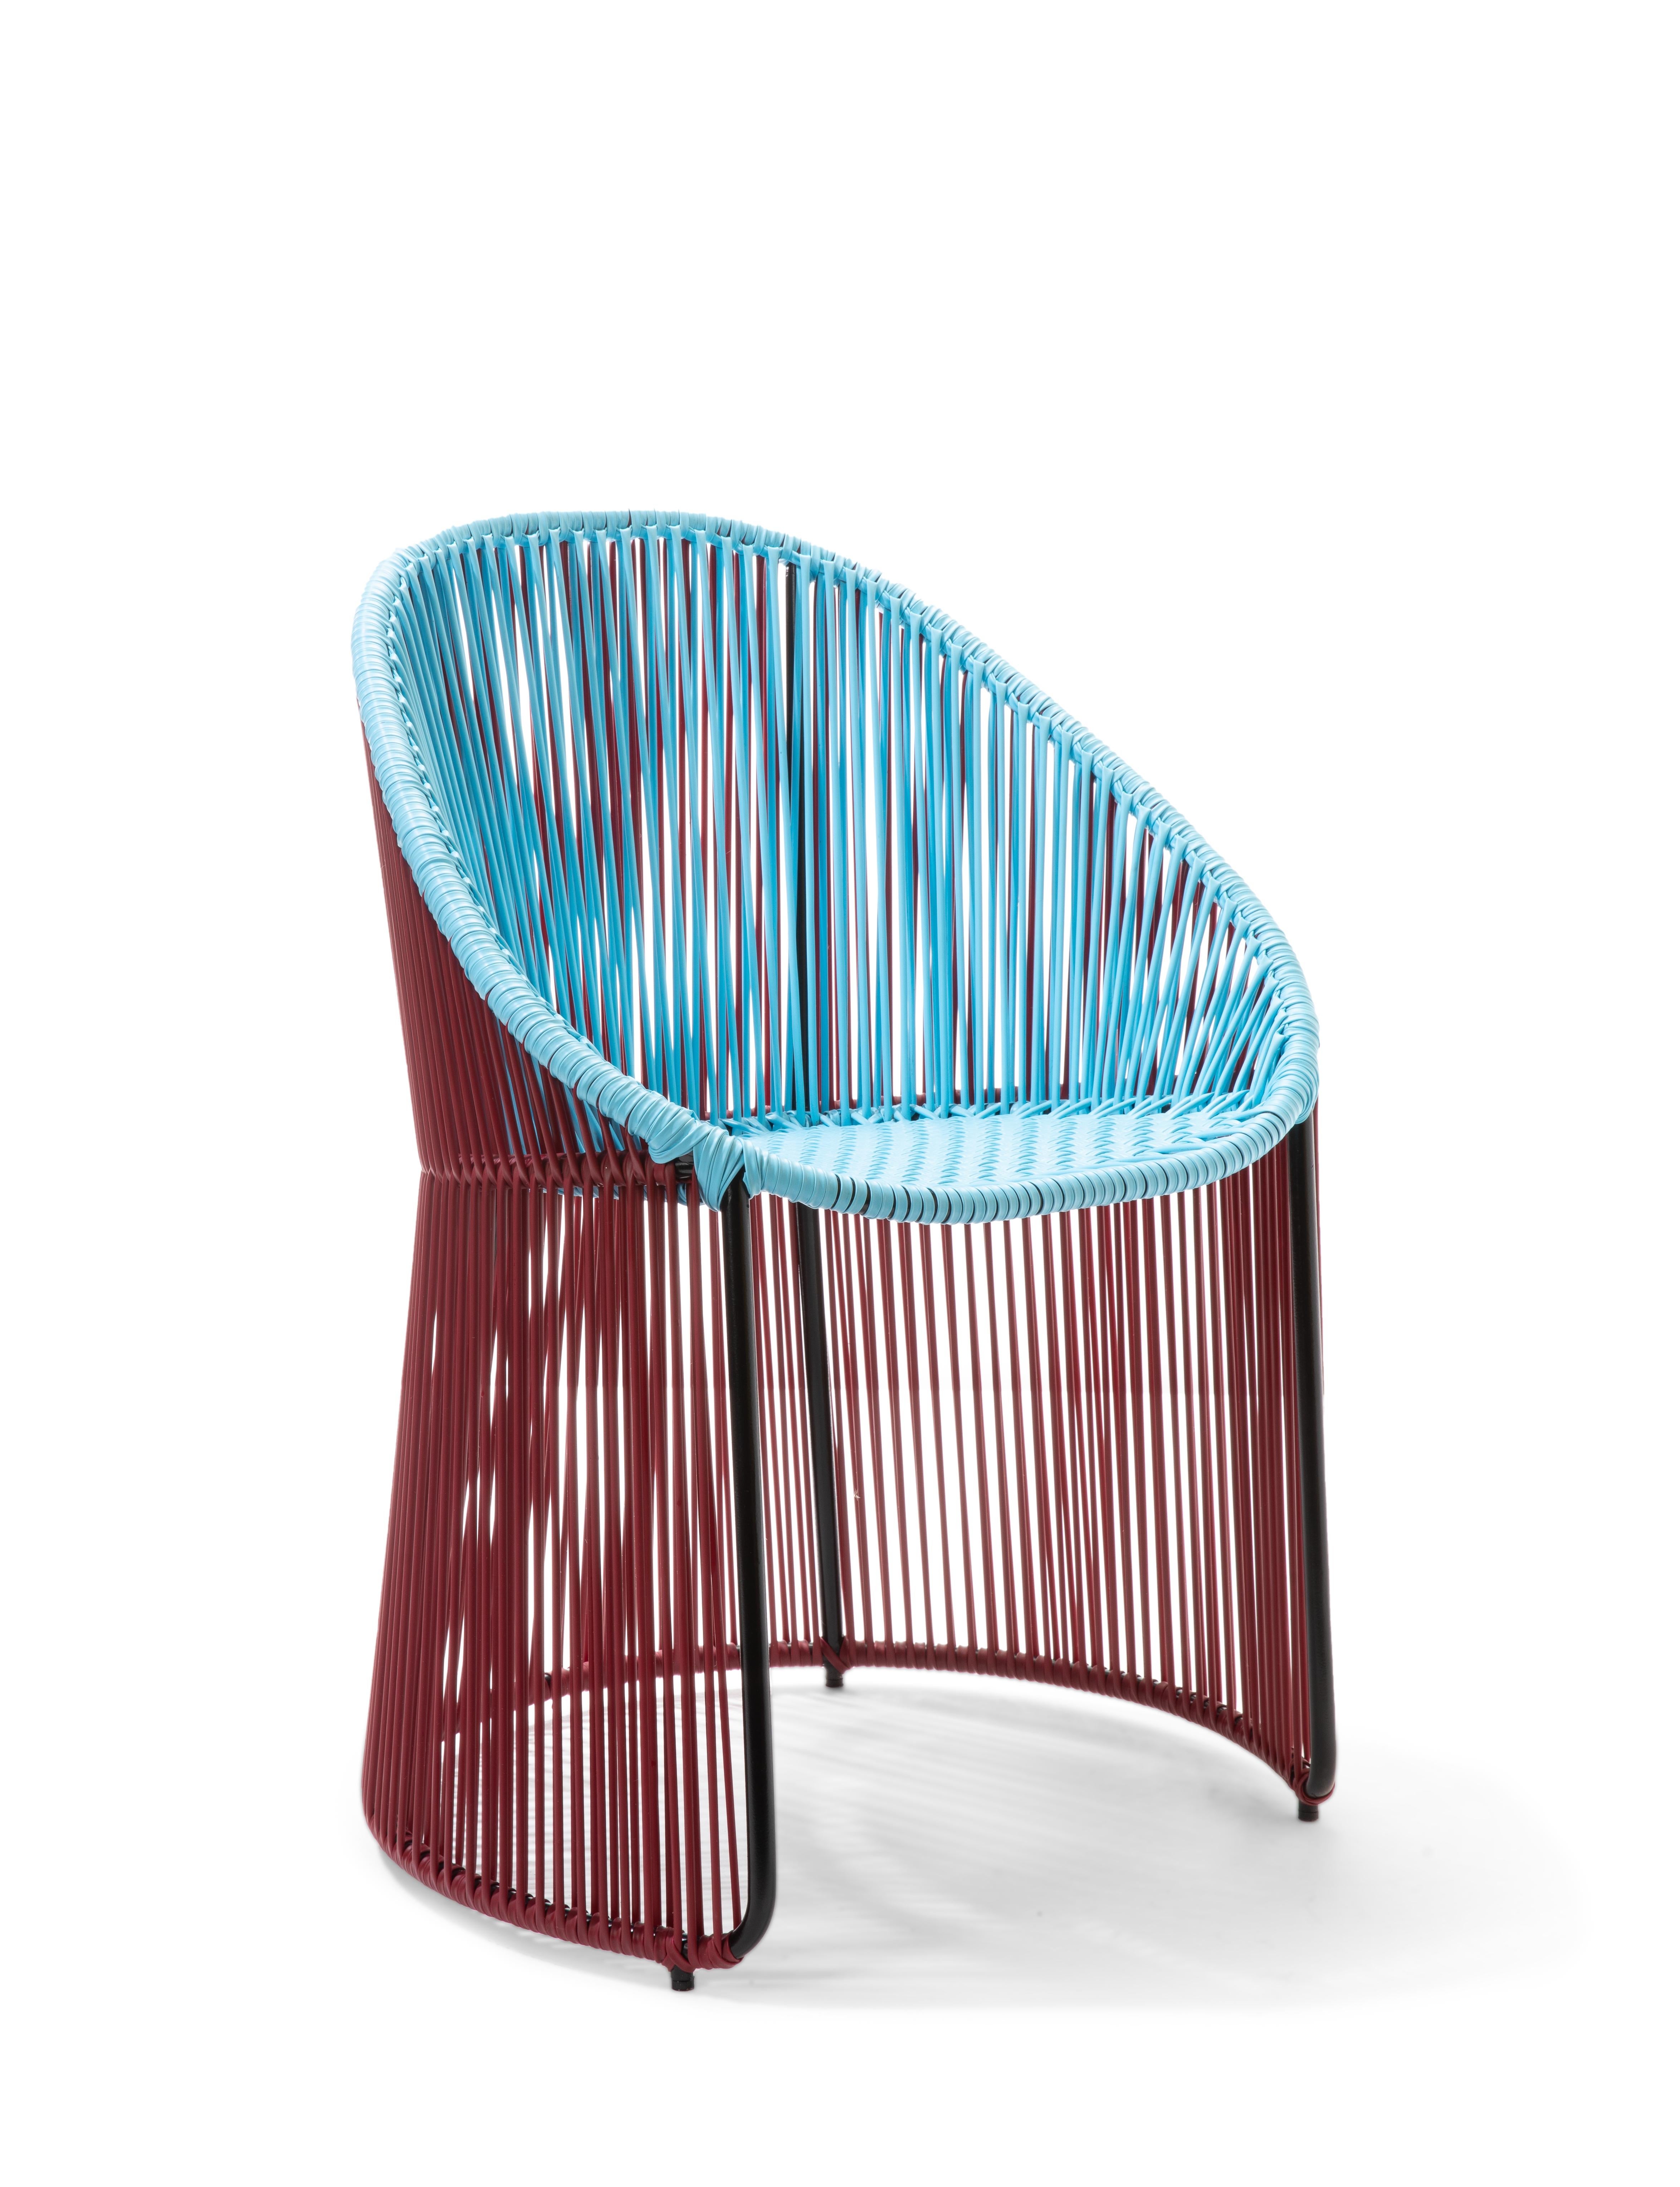 Blue pastel/purple cartagenas dining chair by Sebastian Herkner
Materials: PVC strings. Galvanized and powder-coated tubular steel frame
Technique: made from recycled plastic. Weaved by local craftspeople in Colombia. 
Dimensions: W 60.2 x D 53.8